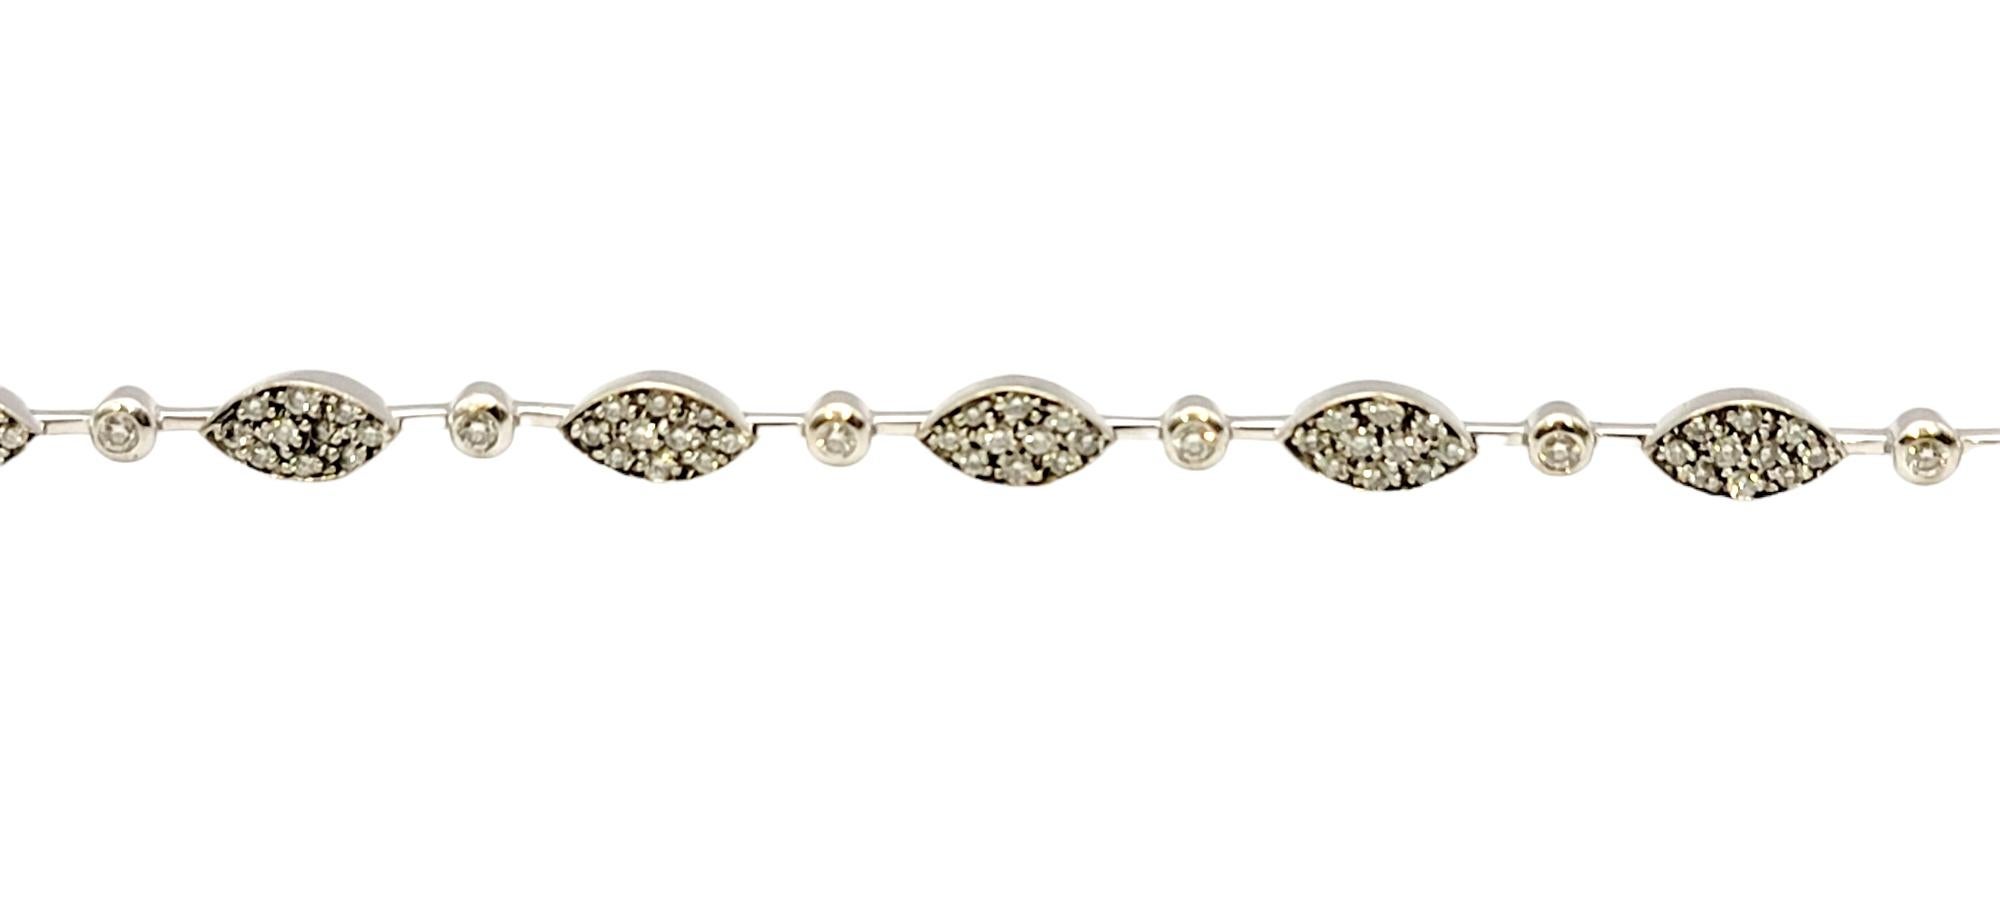 This elegant diamond link bracelet will wrap your wrist in modern beauty. Simple yet chic, the marquis shaped stations are filled with sparkling pave diamonds while a single round diamond in between the links adds a little extra shimmer and shine.